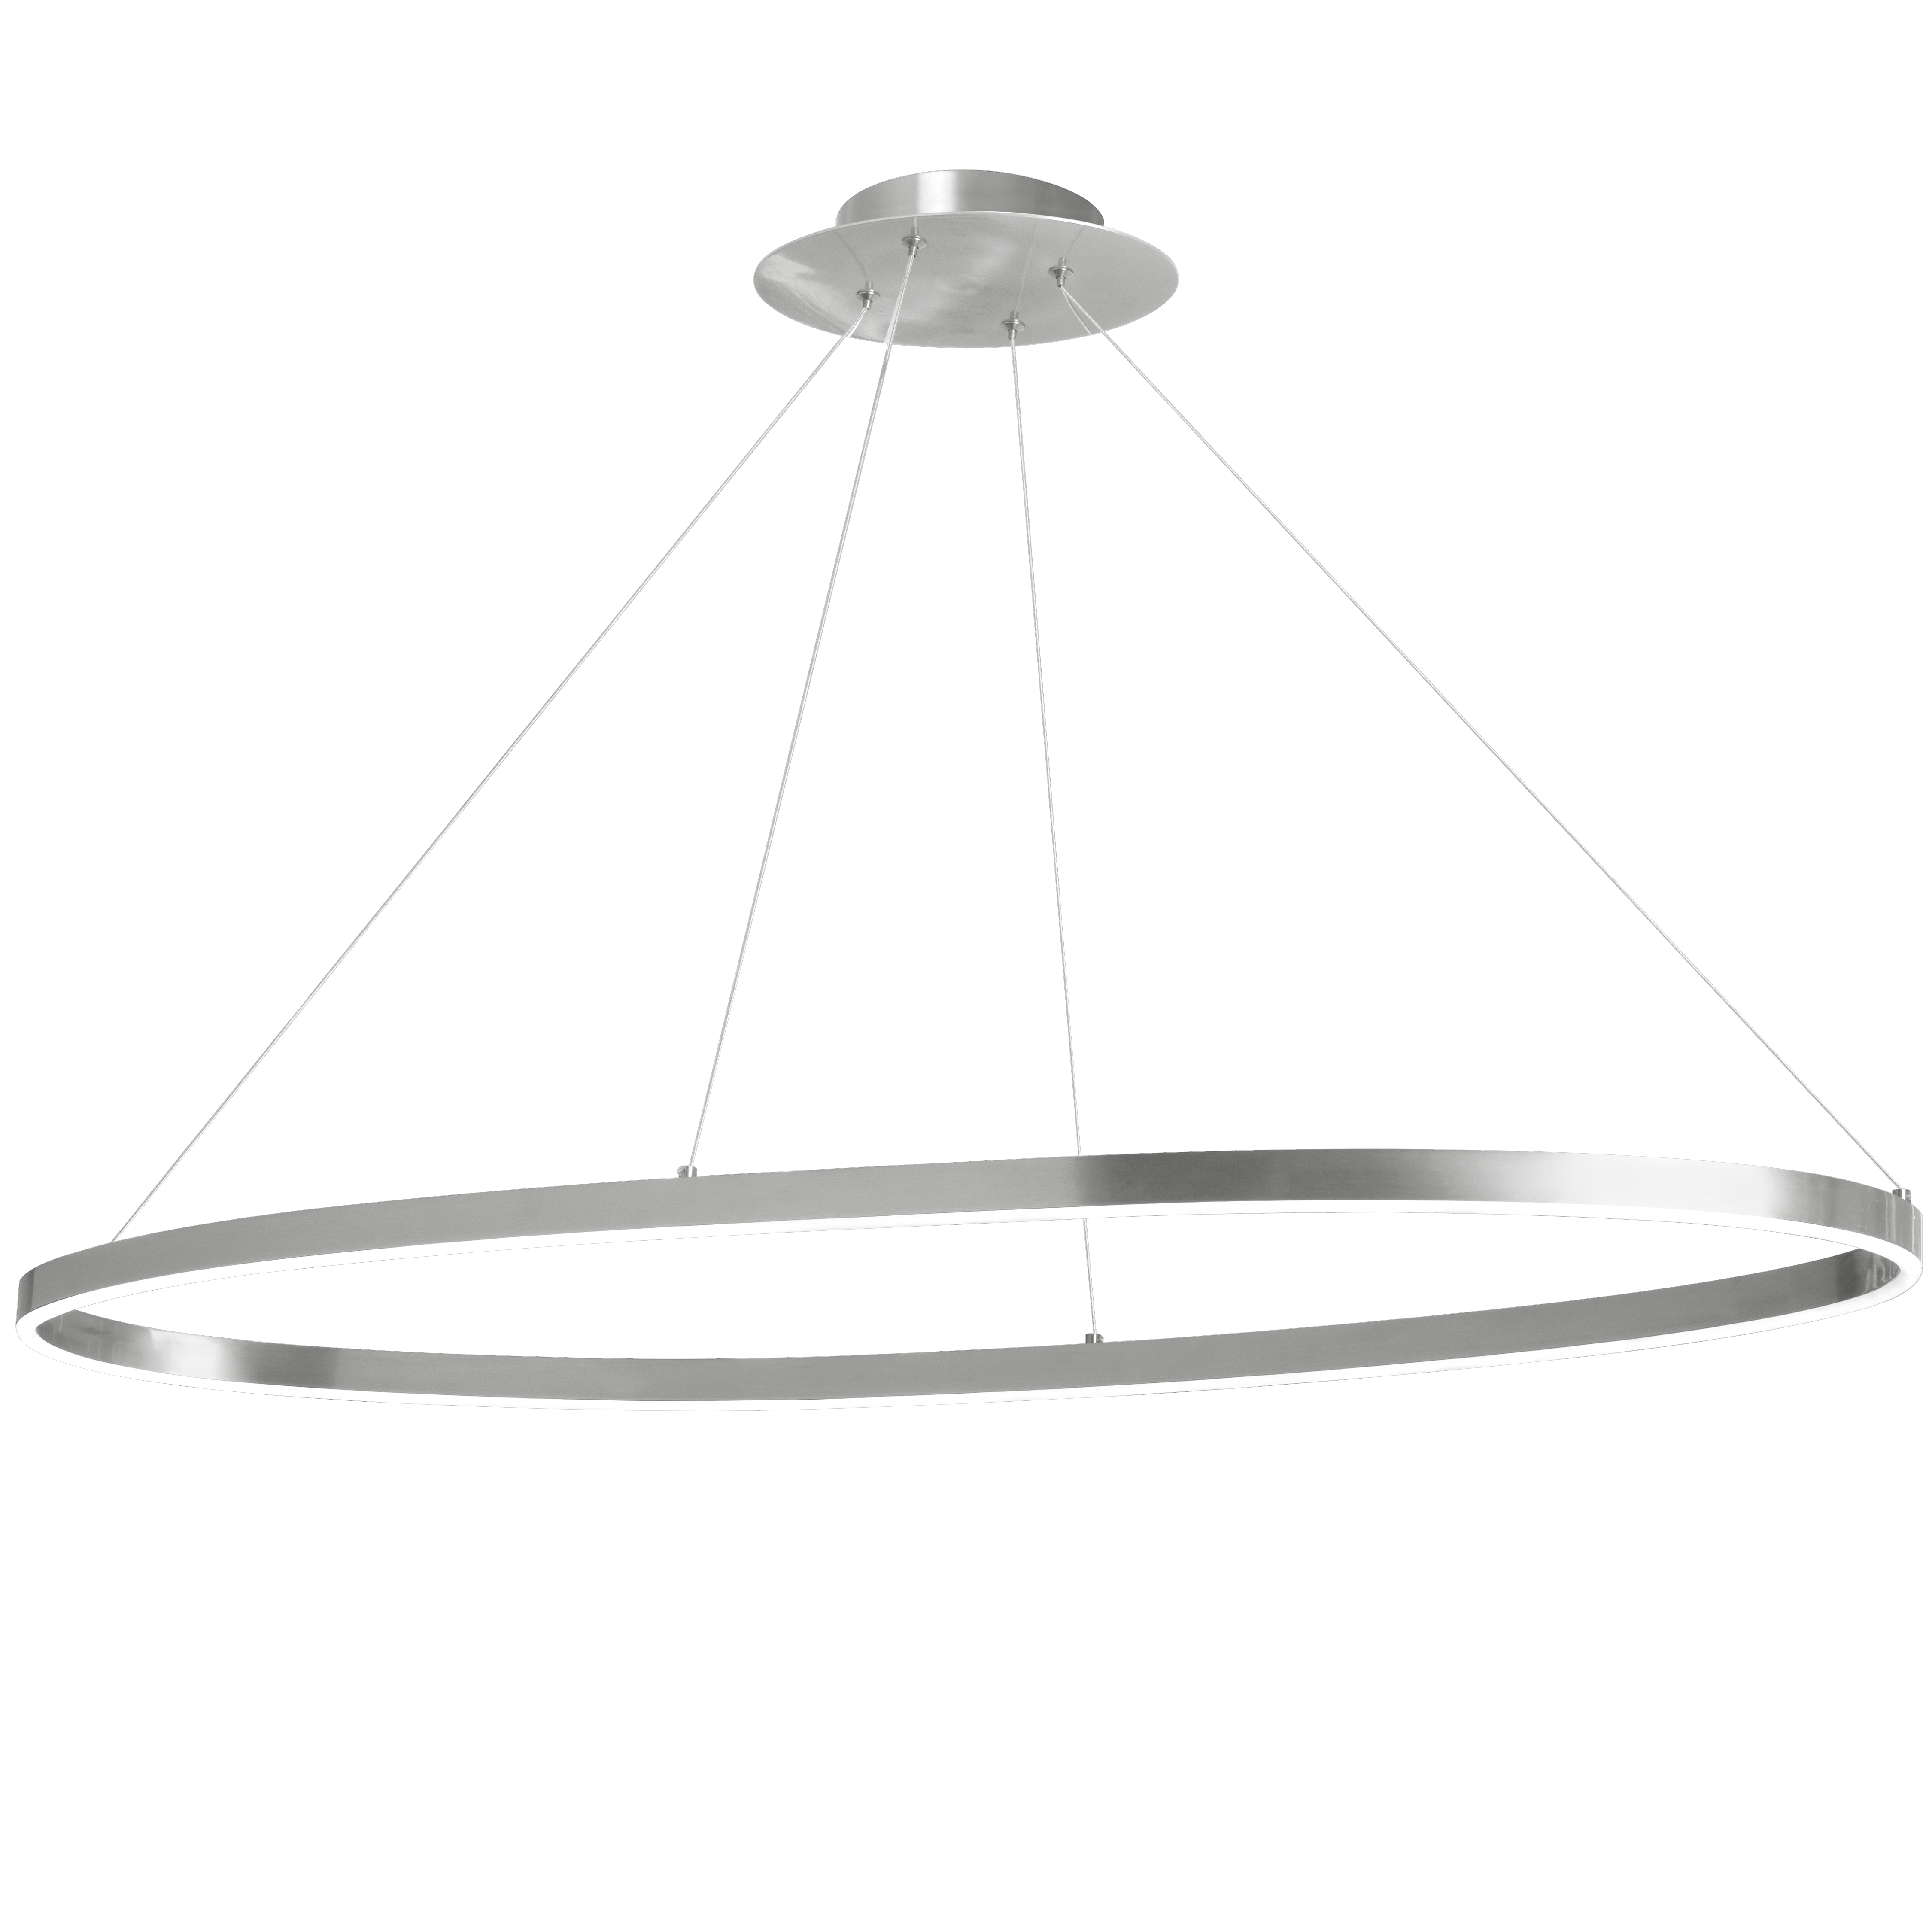 Featuring subtle, face-friendly lighting in a design with a simple and circular appeal, the Circulo family of lighting adds curves to minimalist and modern furnishings.  The airy design comes in one or two tier configurations, with a metal base in your choice of finish, all with a white acrylic diffuser along the inside of the circular shade. Cable drops secure the design in place.  Eye-catching without becoming overbearing, the Circulo family of lighting comes in various sizes suitable for any room of your home, including hallways.